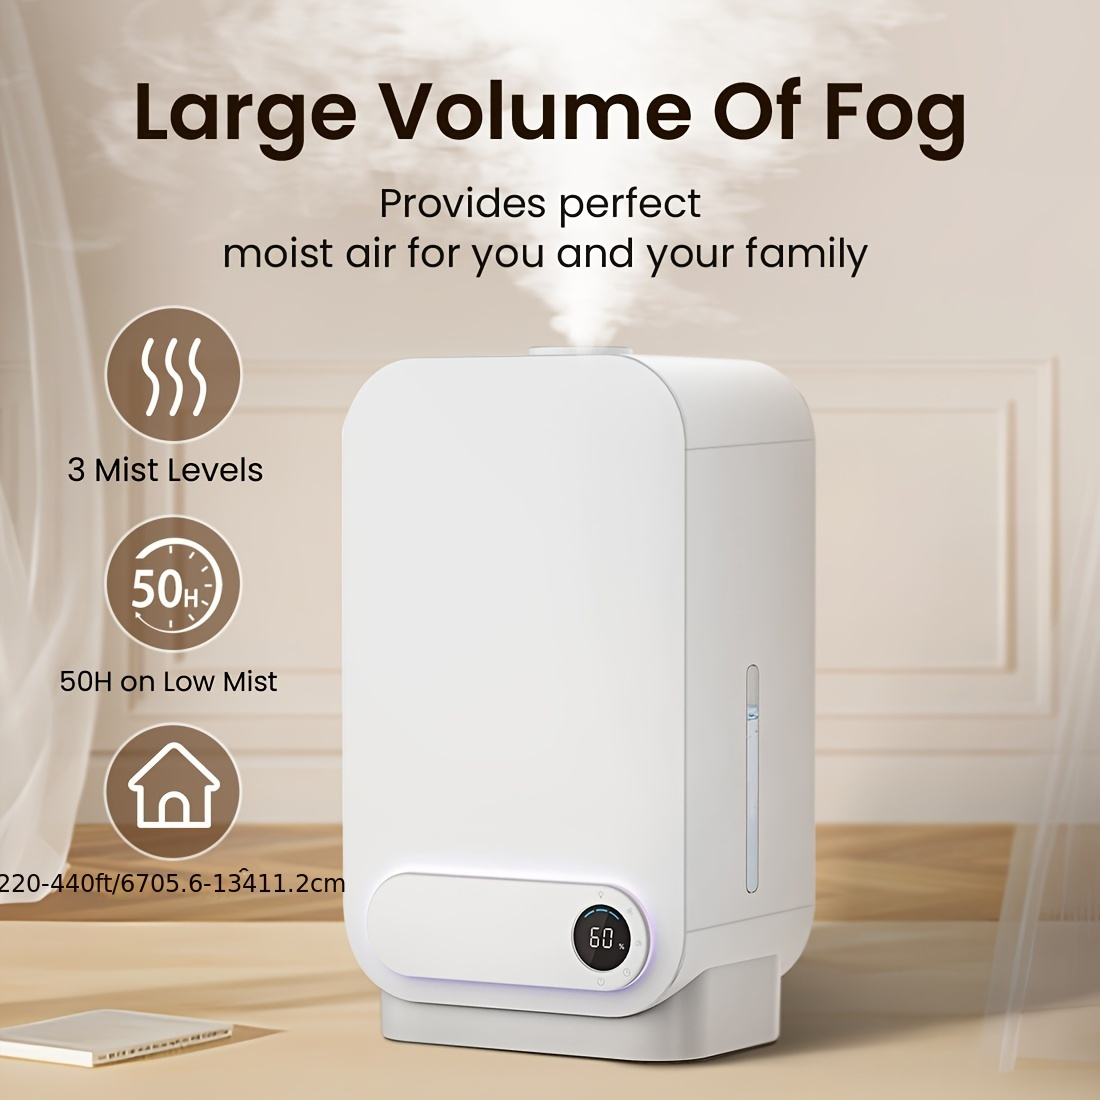 

Humidifiers For Bedroom, 5l Ultrasonic Cool Mist Humidifiers For Home Baby Nursery & Plants, Top Fill Smart Air Humidifier Runs For Up To 50 Hours, Intelligent Humidity Control And Auto Shut-off